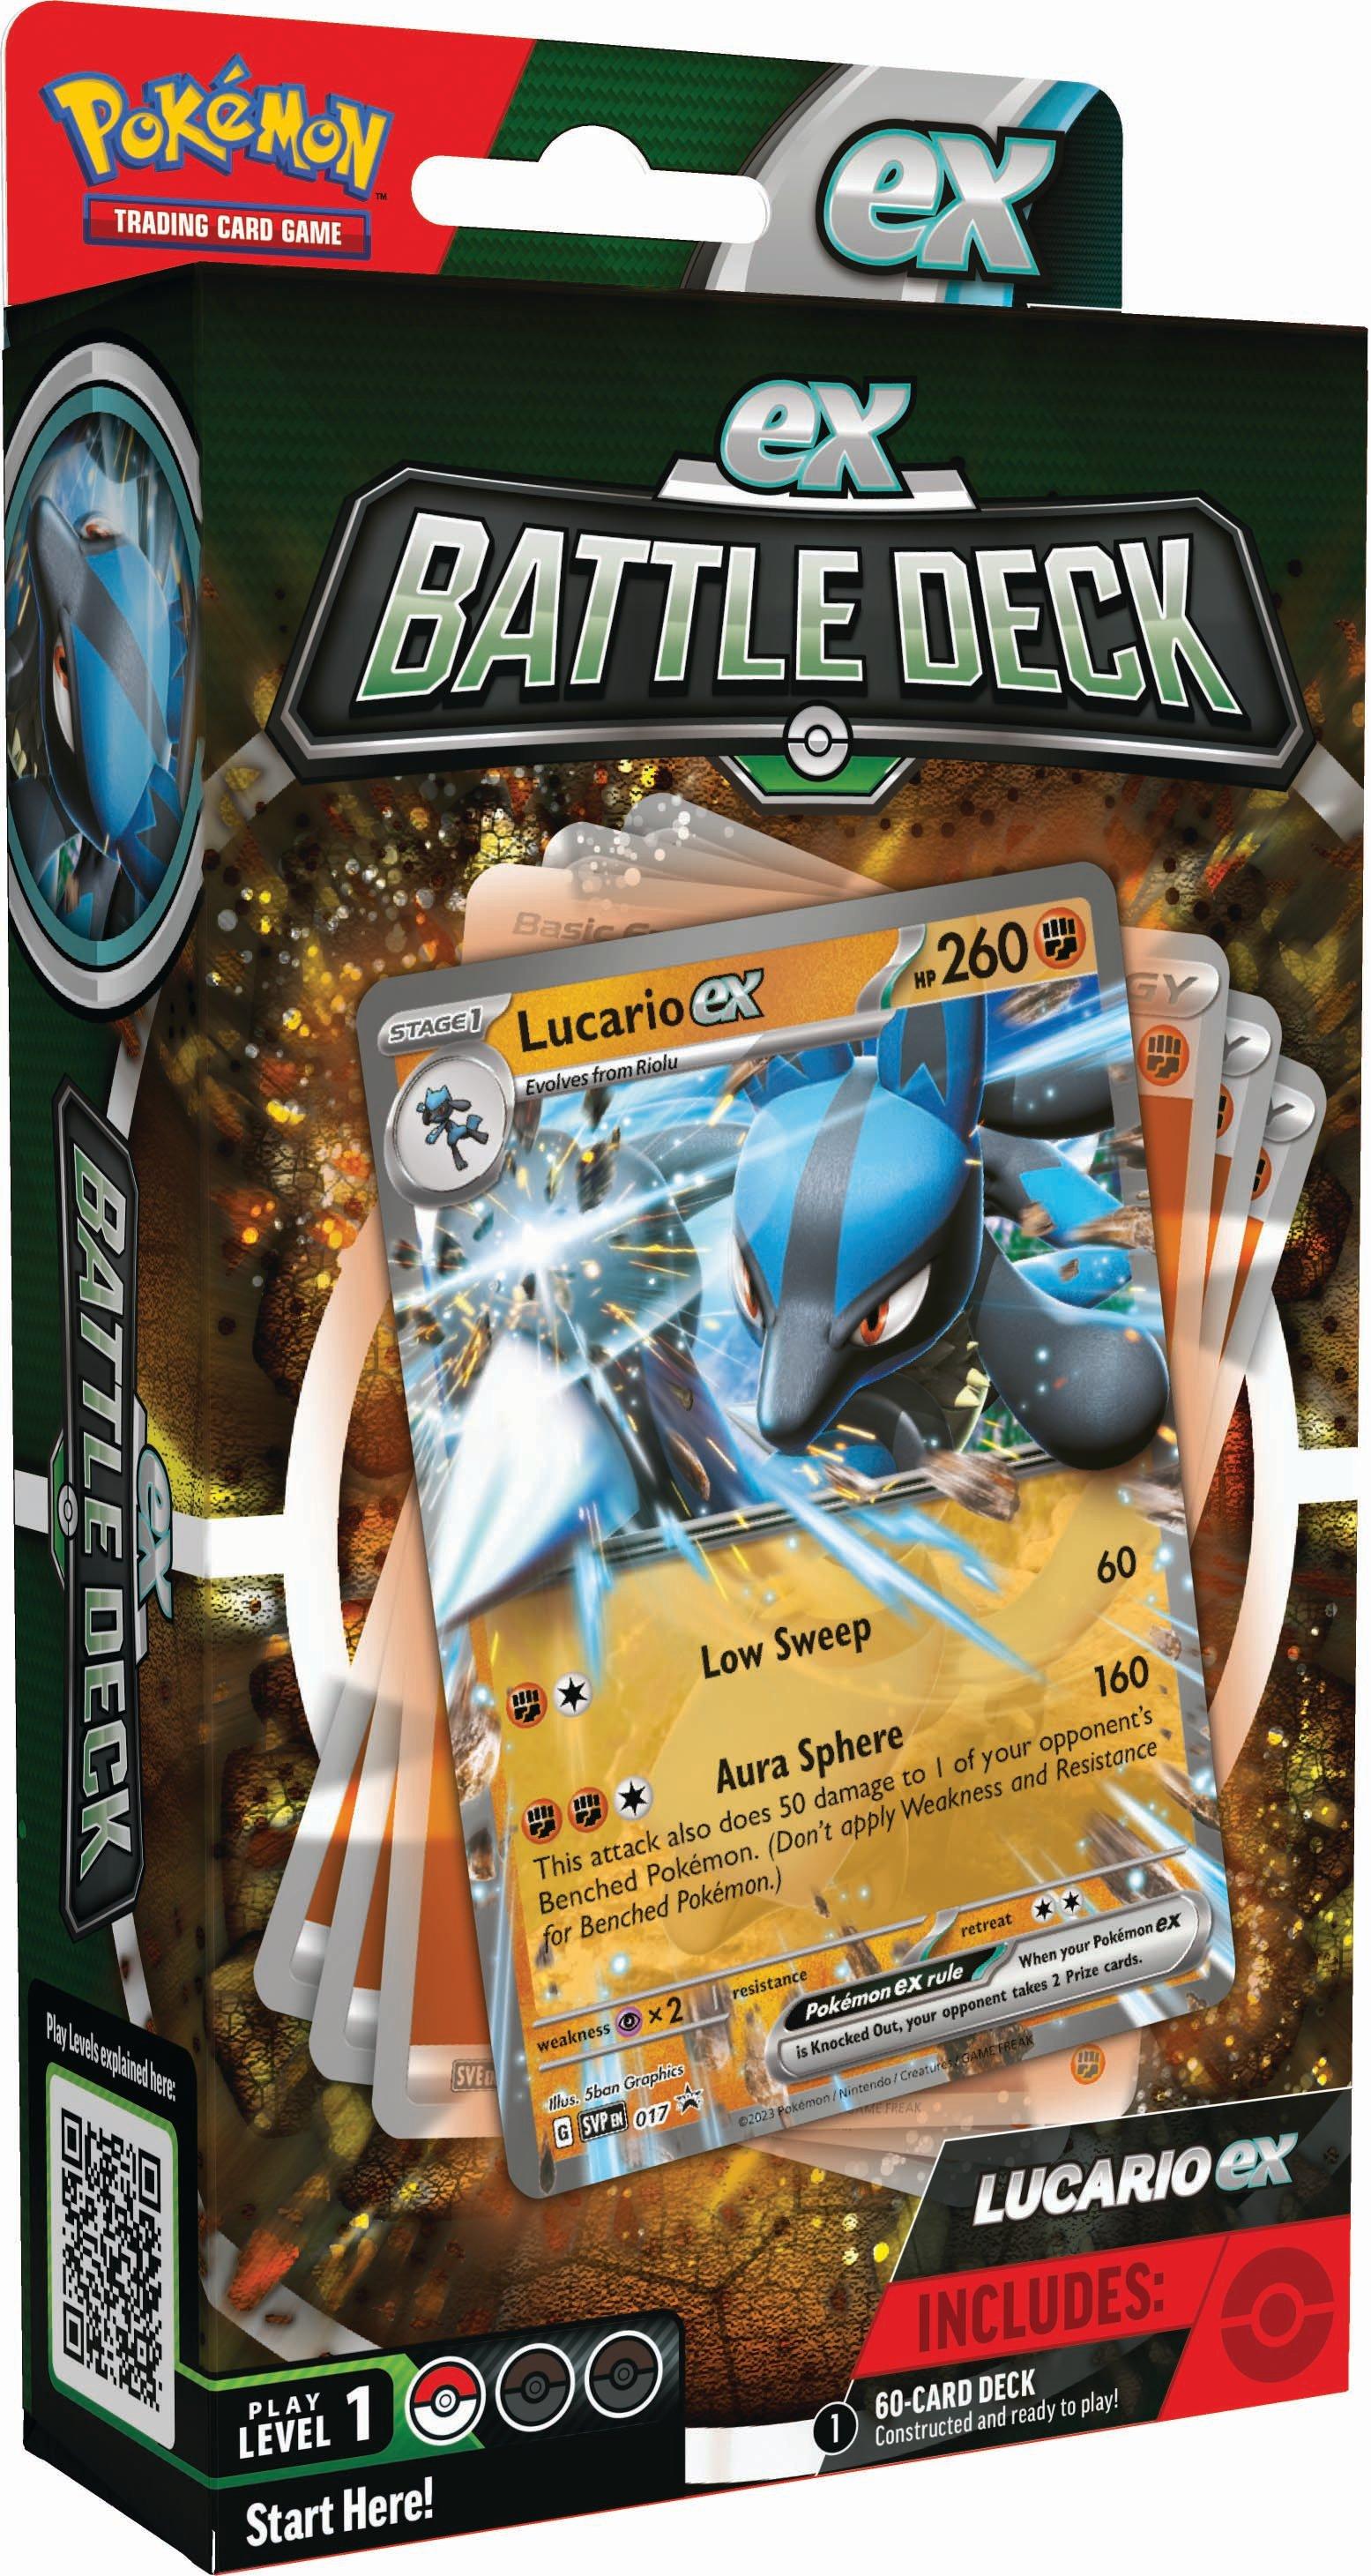 Pokémon Trading Card Game: Battle Deck Ampharos ex or Lucario ex Styles May  Vary 290-87228 - Best Buy